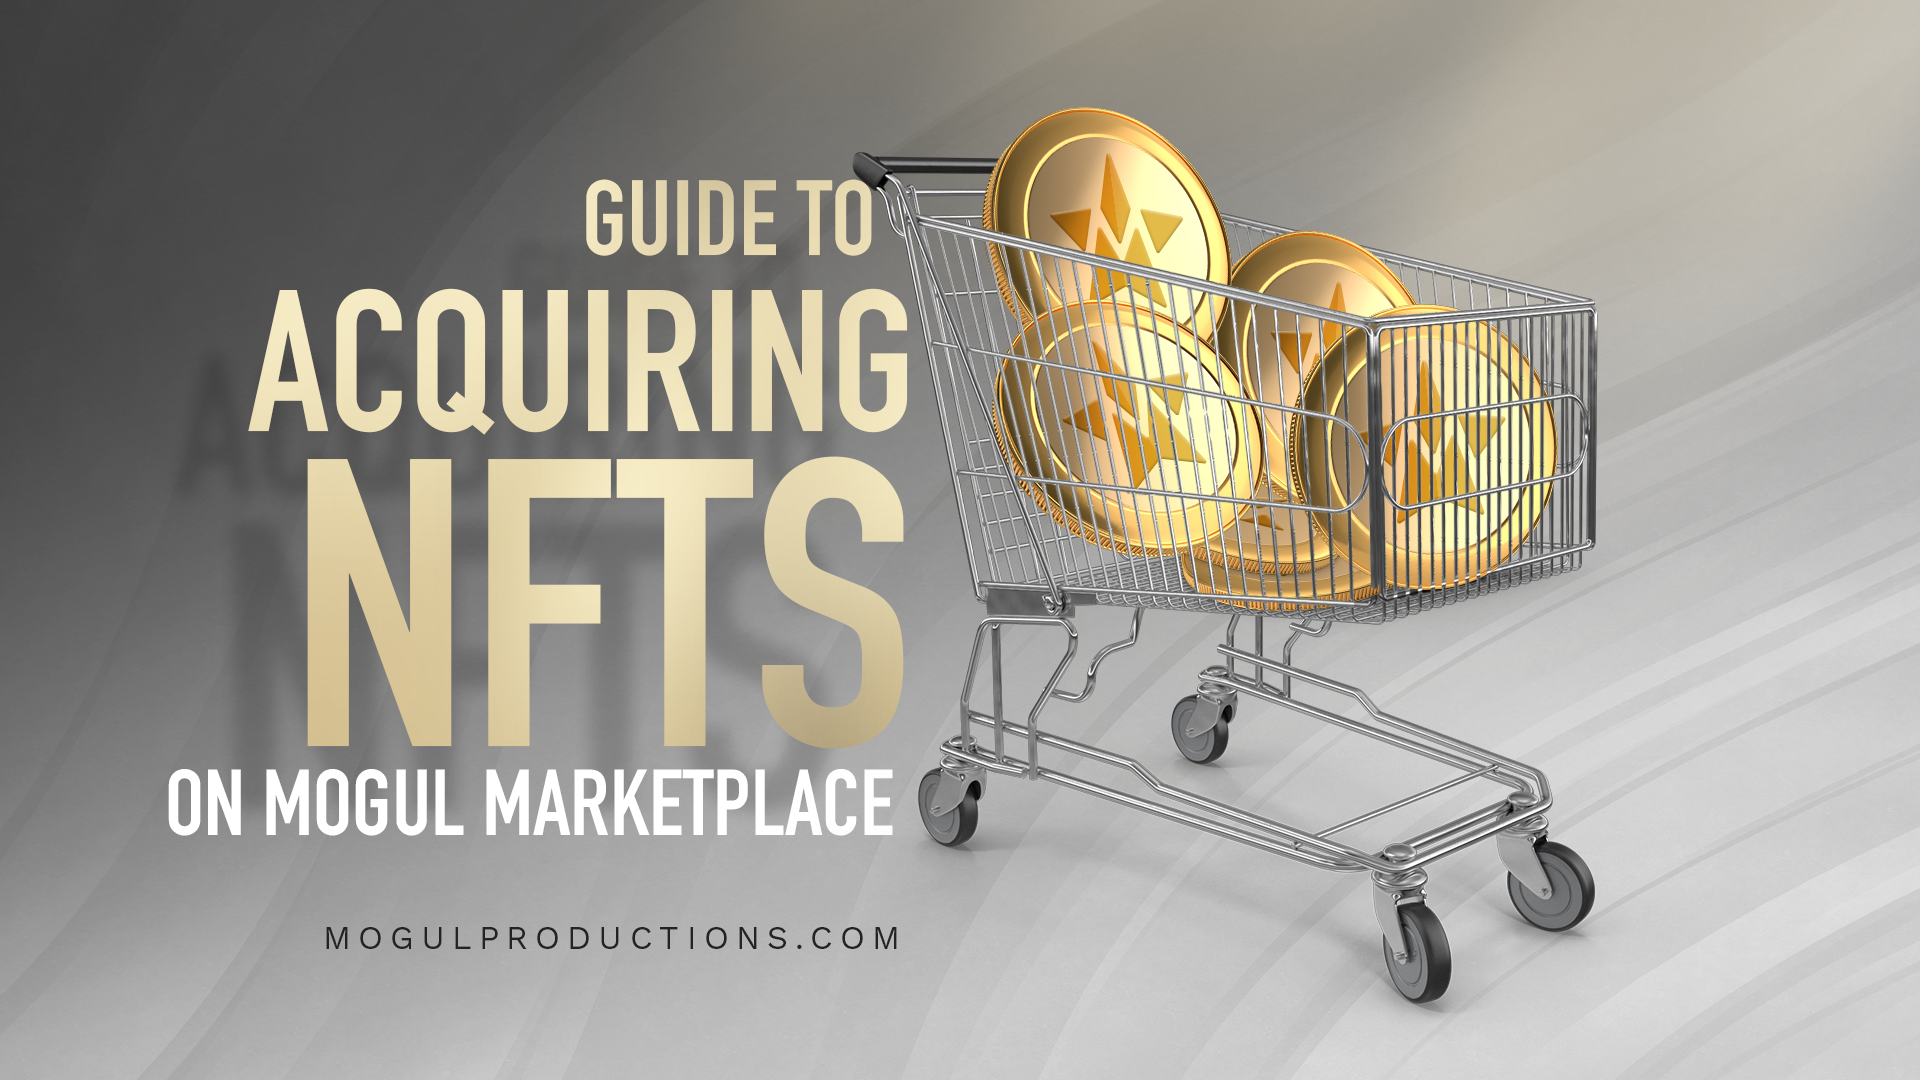 Mogul Productions - Guide to Acquiring NFTs on Mogul Marketplace